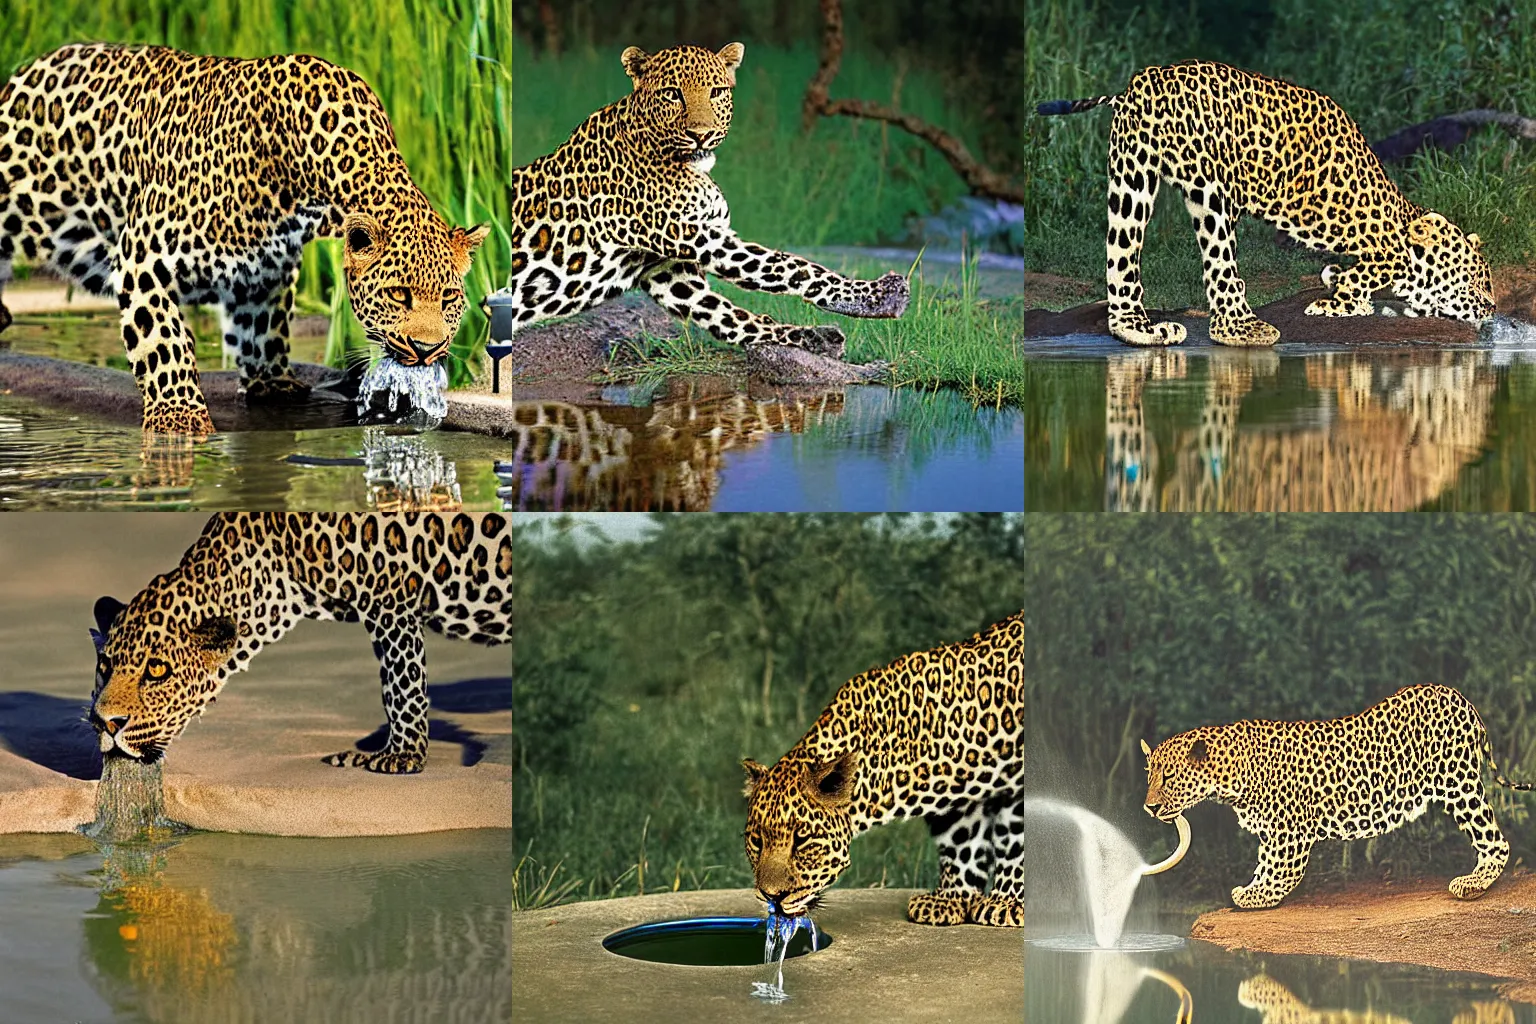 Prompt: a photograph by Frans Lanting of leopard drinking water from an oasis